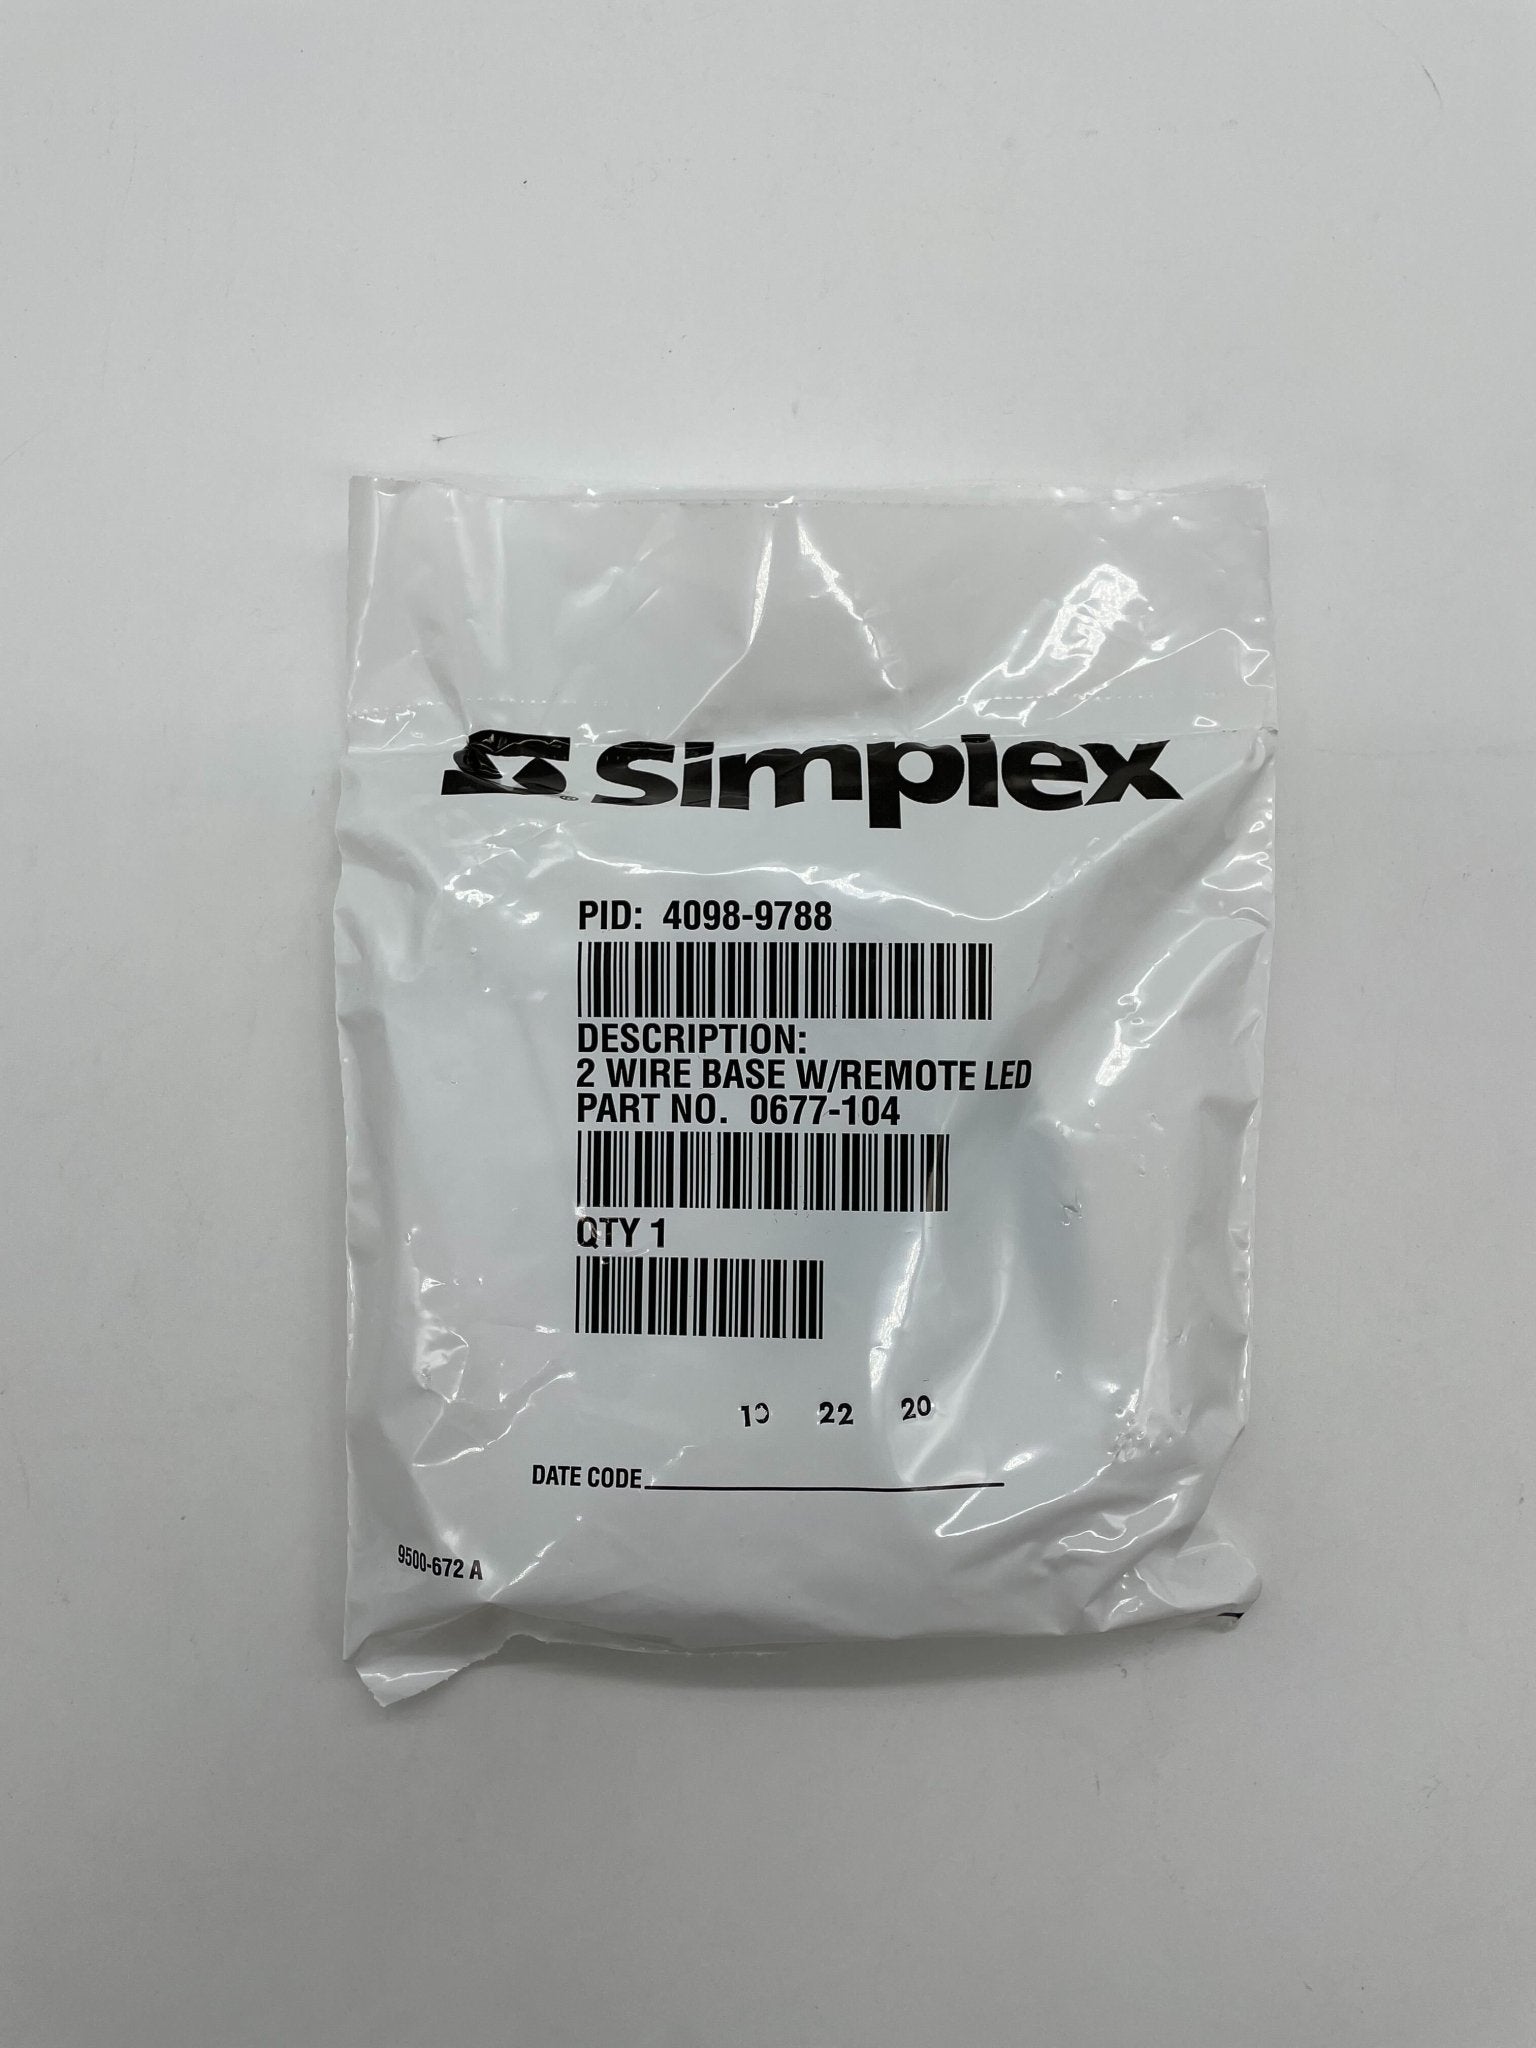 Simplex 4098-9788 2-Wire Base with connections for Remote Alarm LED Indicator - The Fire Alarm Supplier